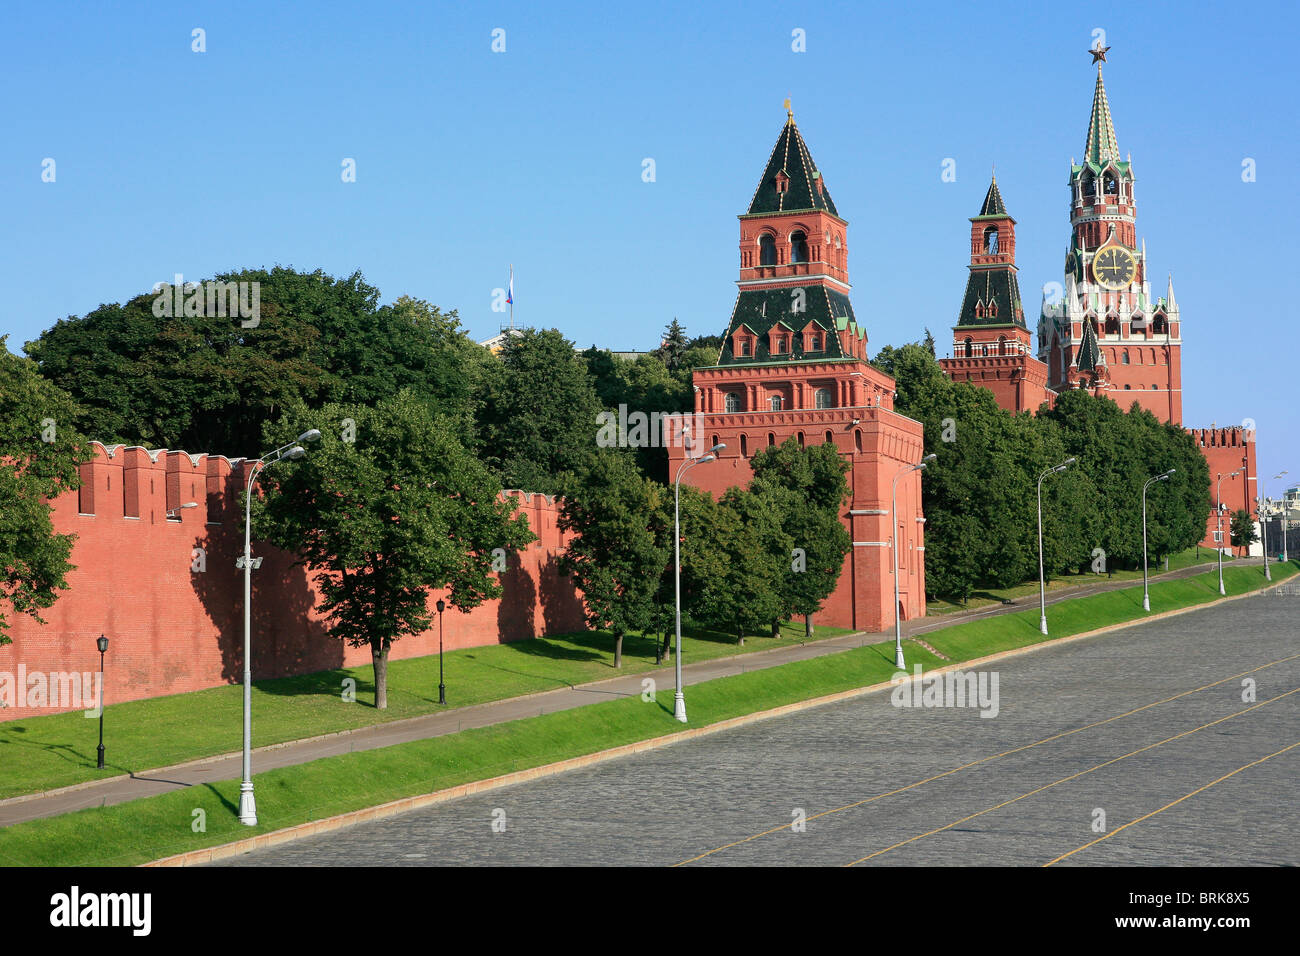 The Savior Tower (1491) and various other towers of the Kremlin in Moscow, Russia Stock Photo